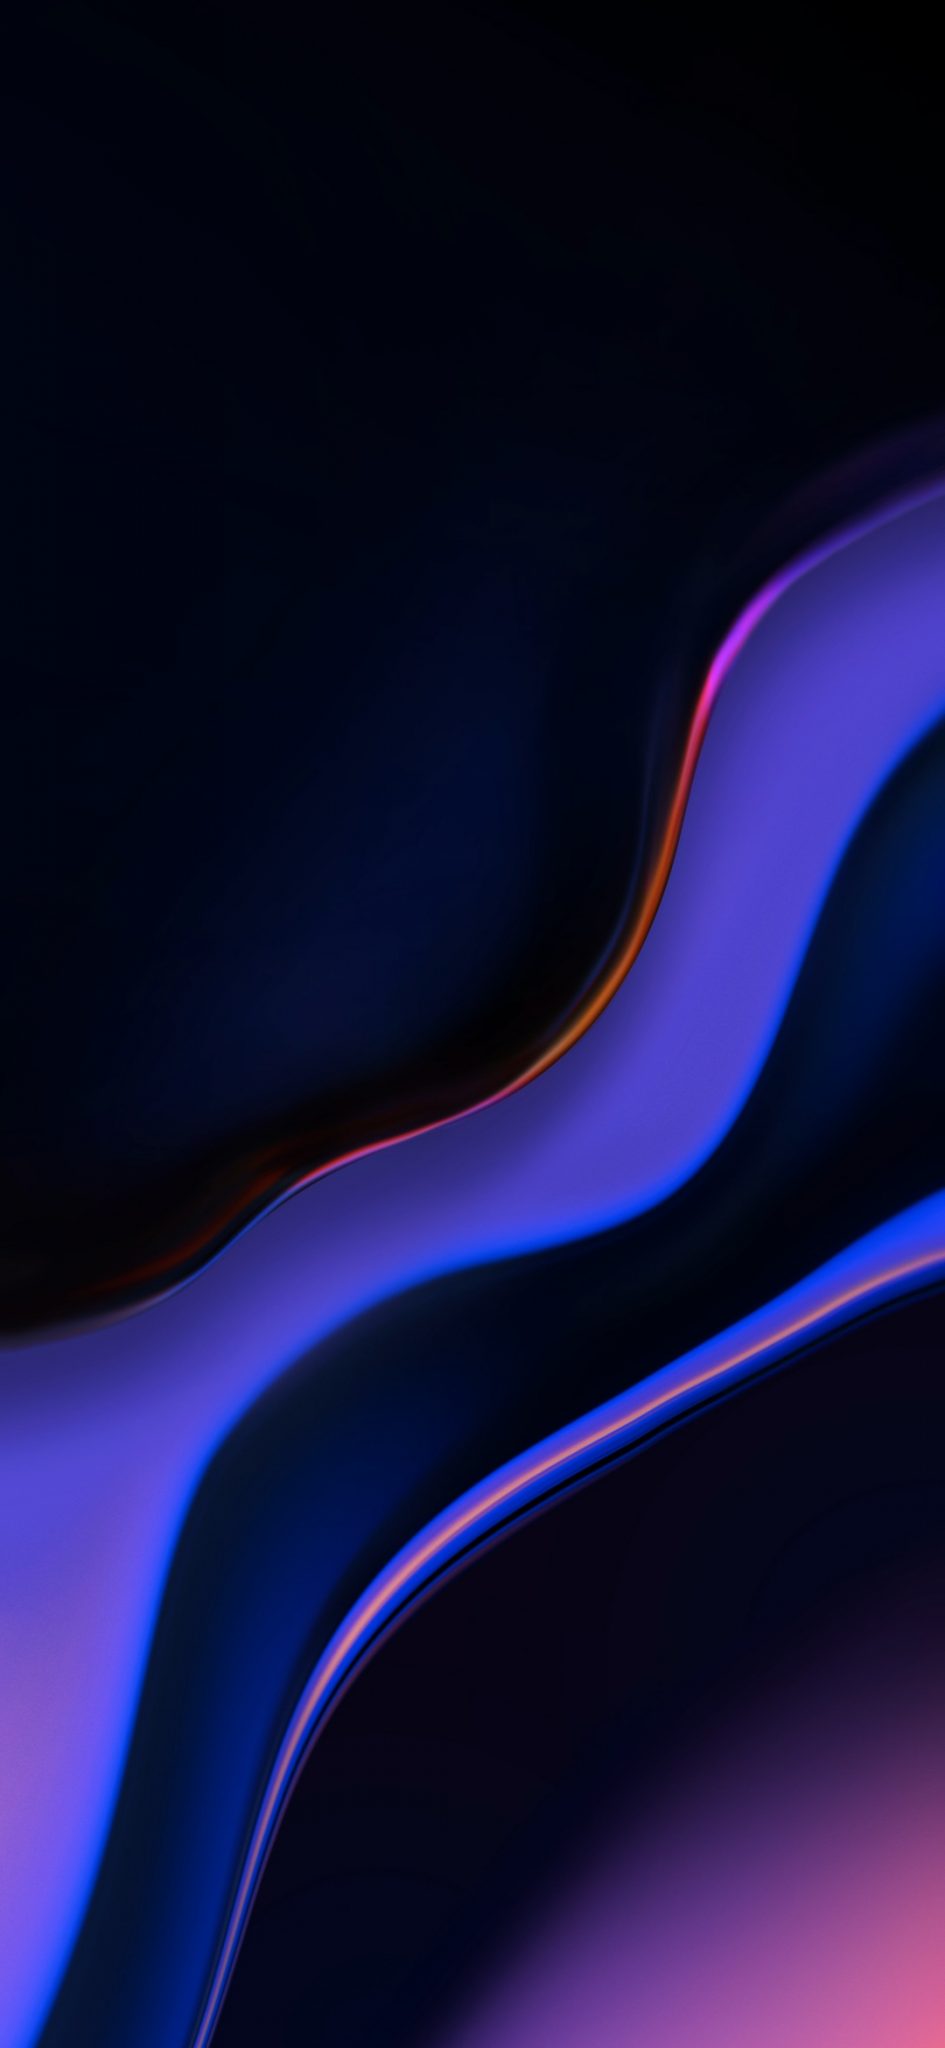 Free Download OnePlus 6T Stock Wallpapers [4K] - TechFoogle